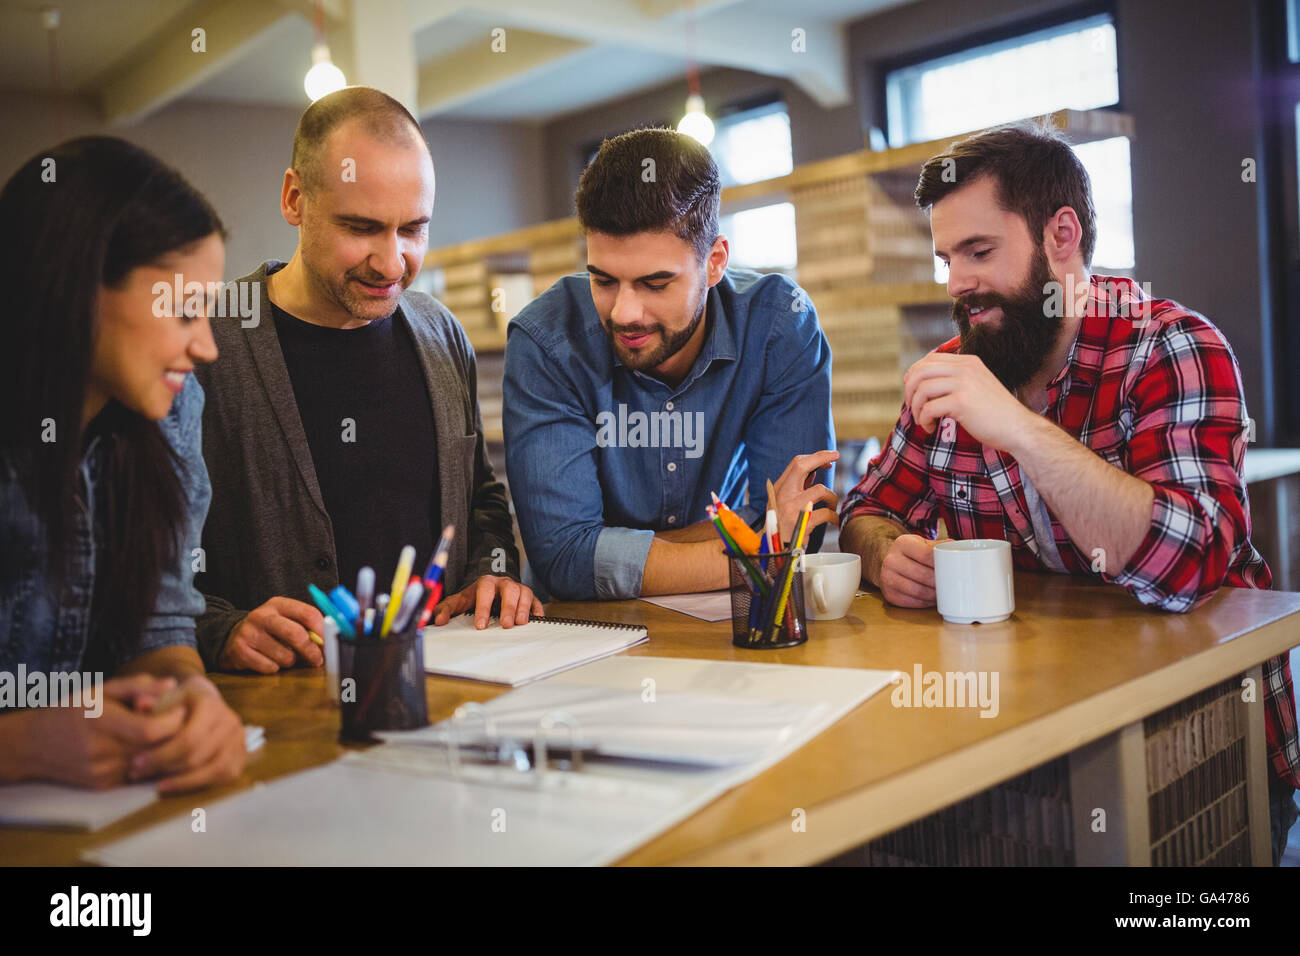 Creative business people discussing at table Stock Photo